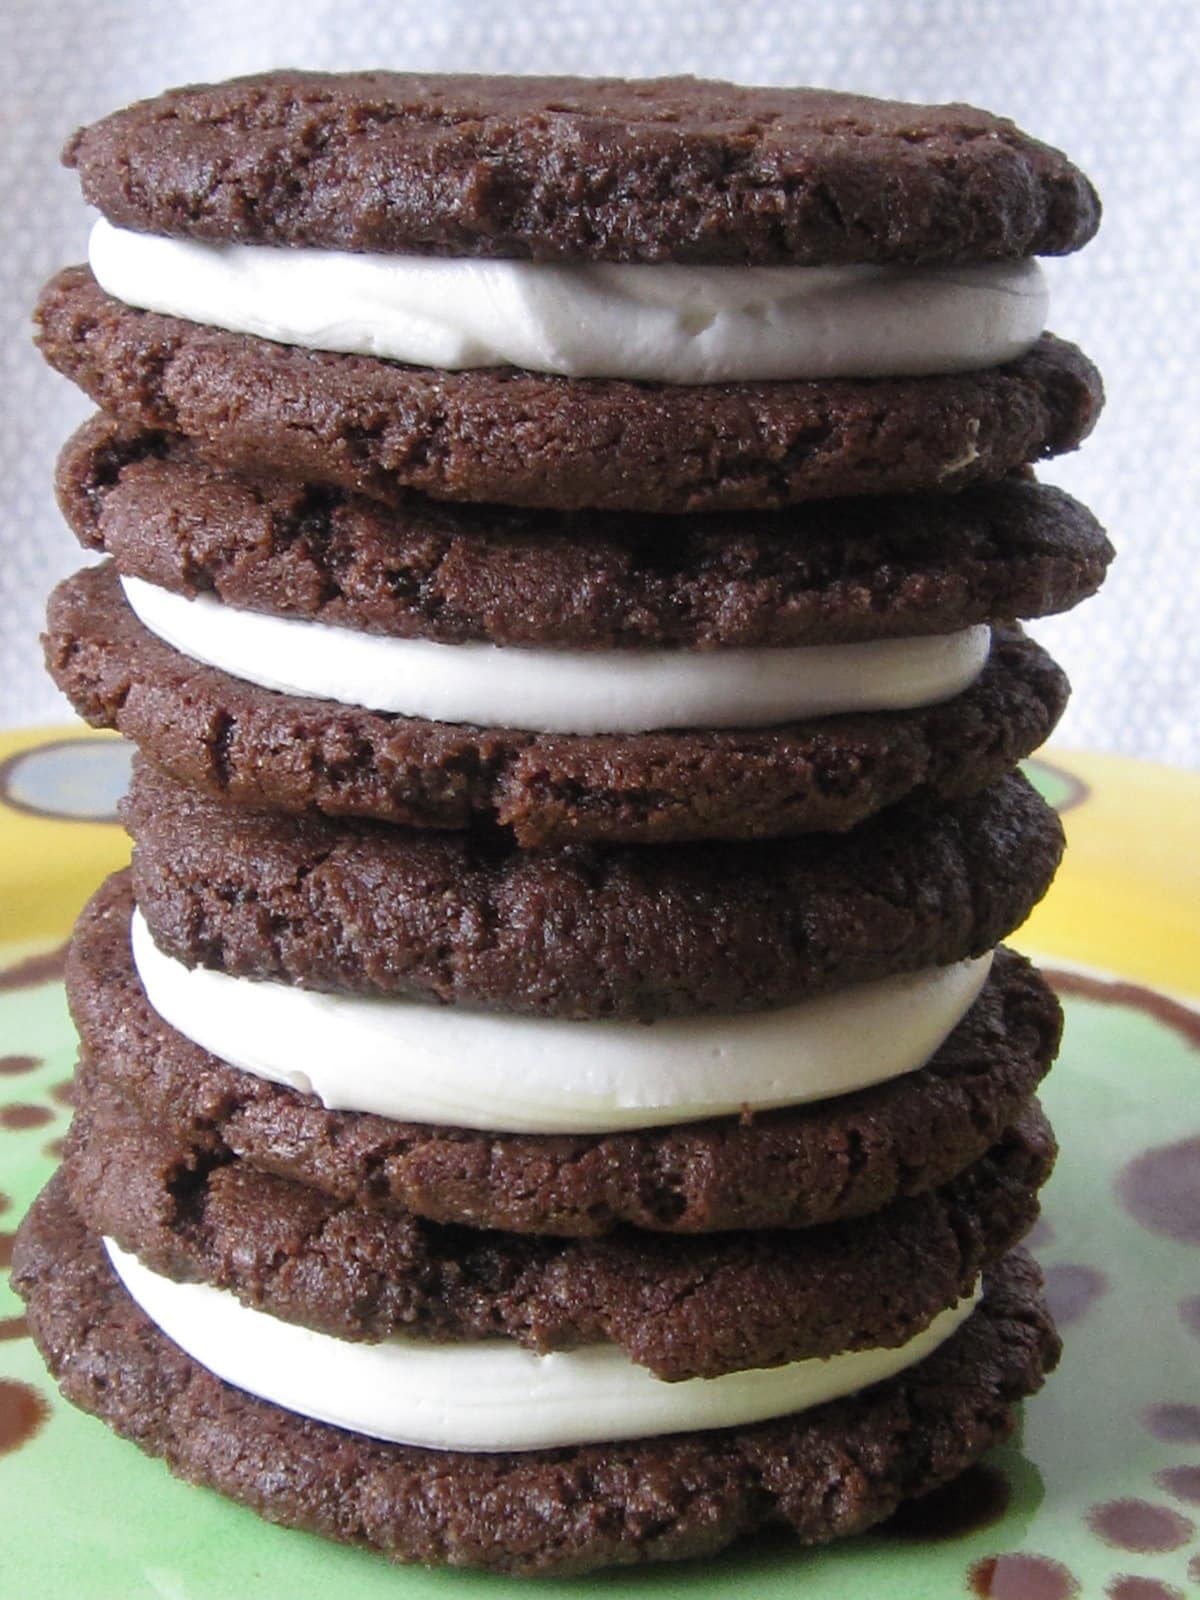 Close-up view of a stack of homemade oreo cookies